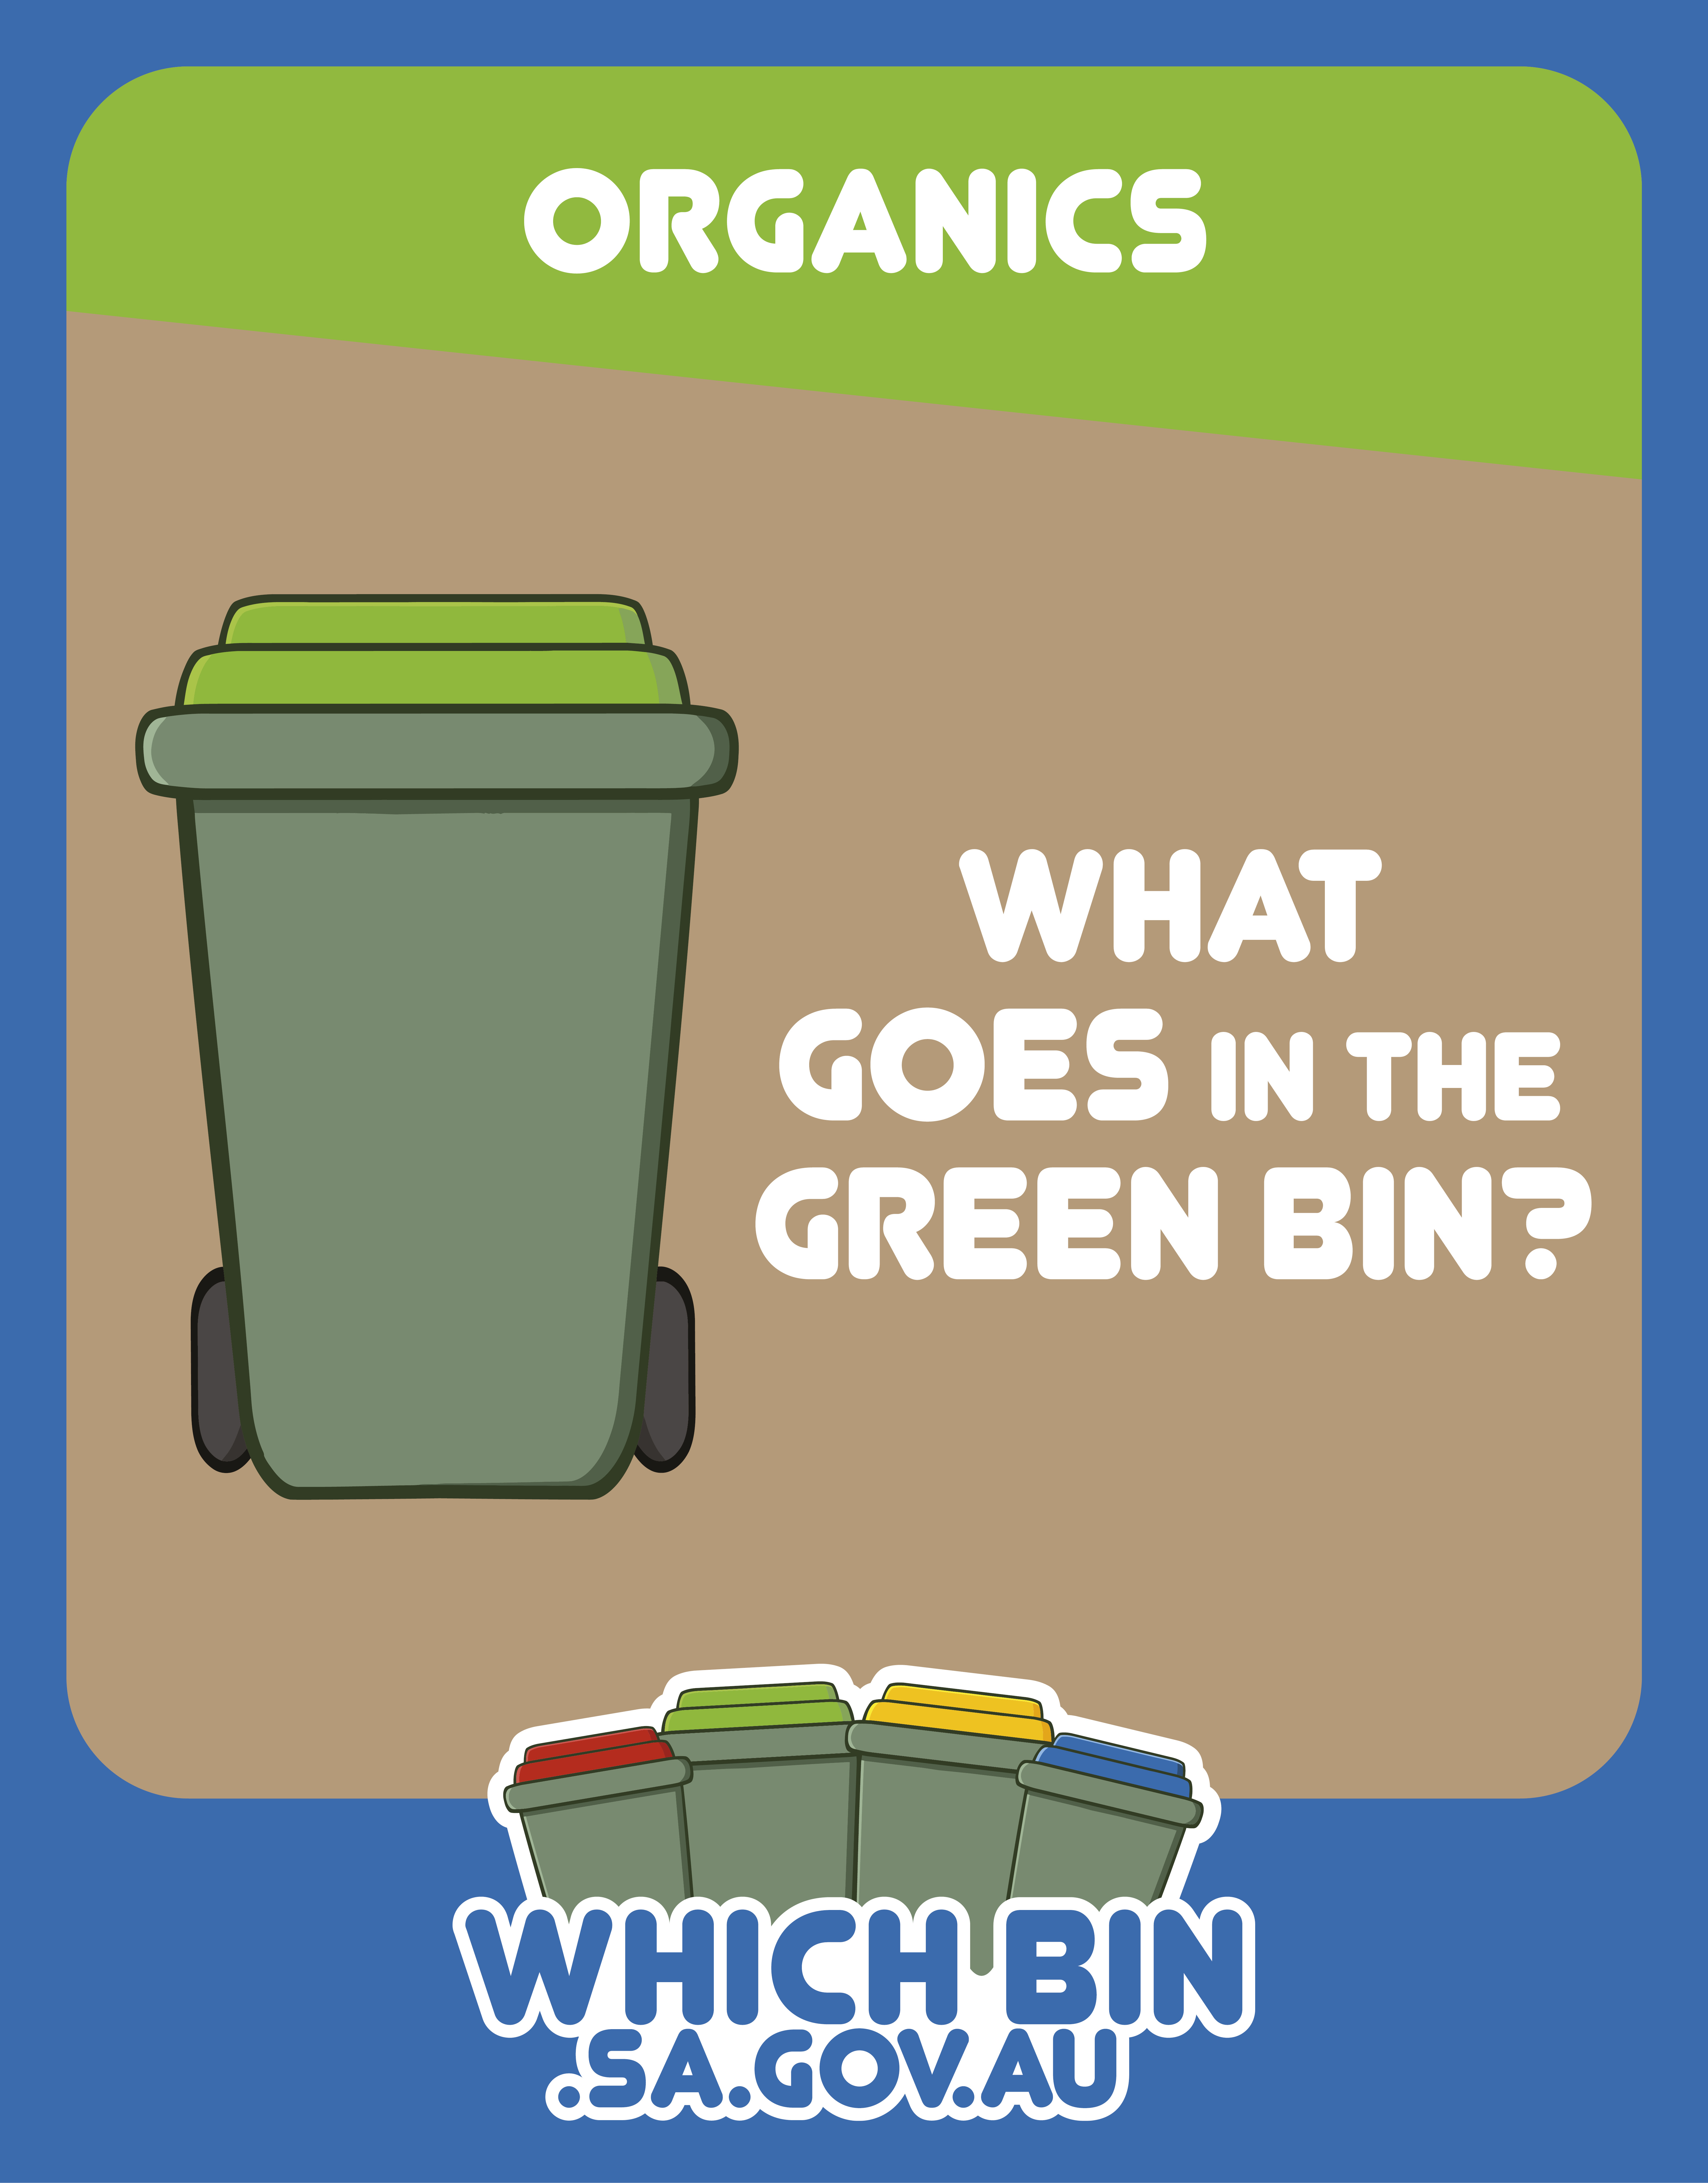 What goes in the green bin?